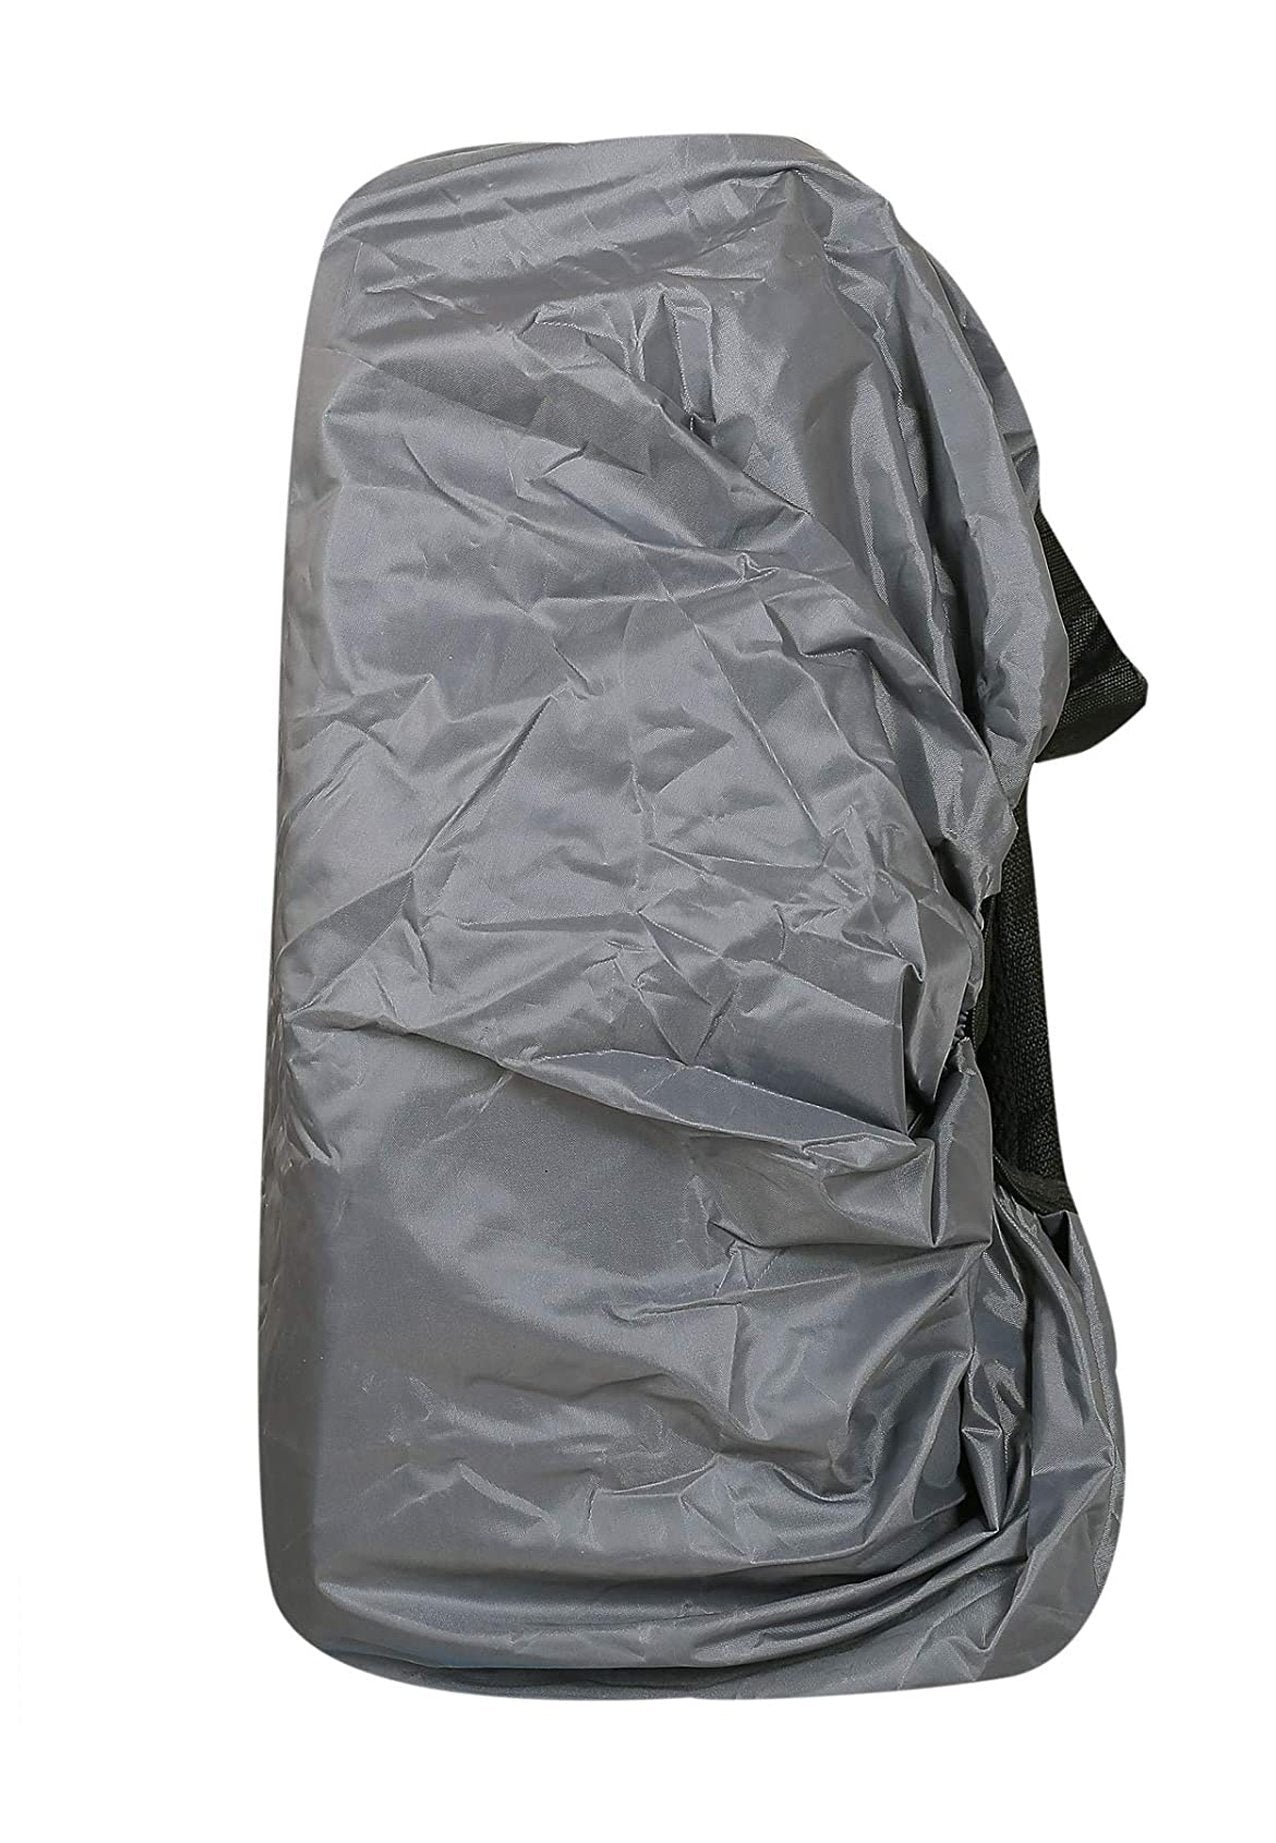 Dhariwal PU Water & Dustproof Cover for Backpack 40L-50L with Internal Push Clip Raincover Mohanlal Jain (Dhariwal Bags) 